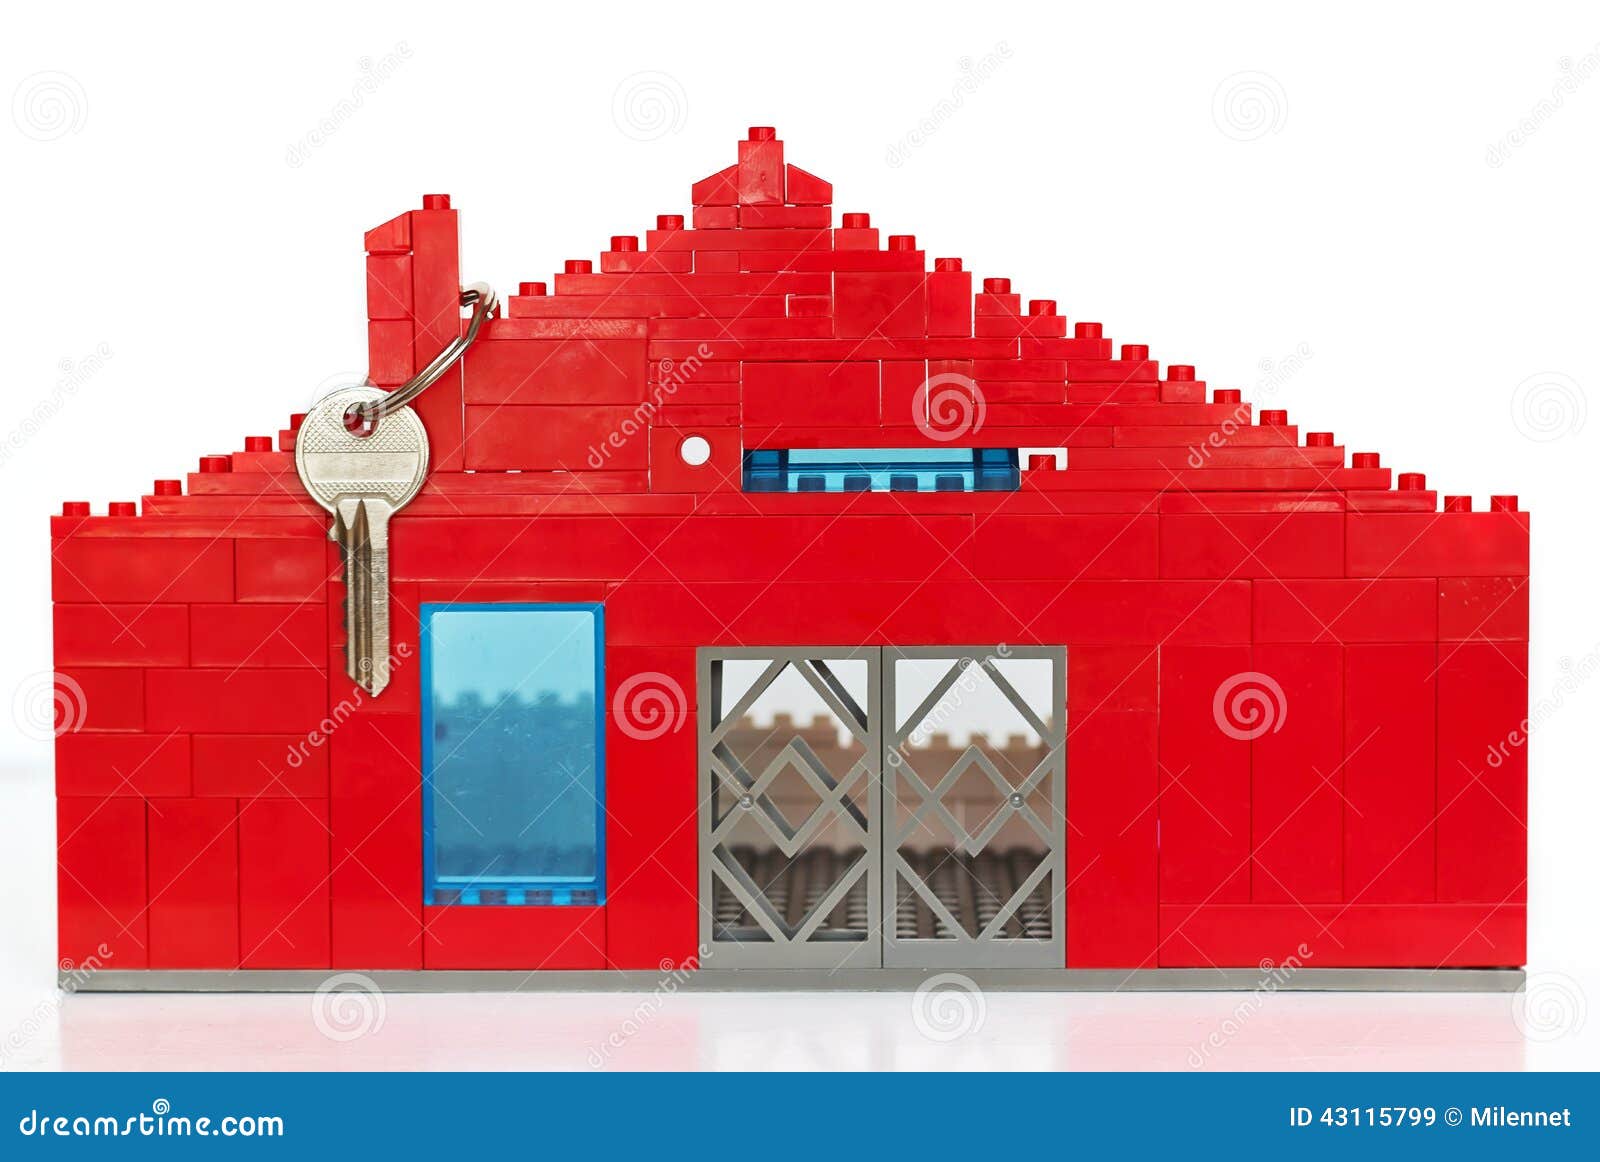 house made of plastic figurines